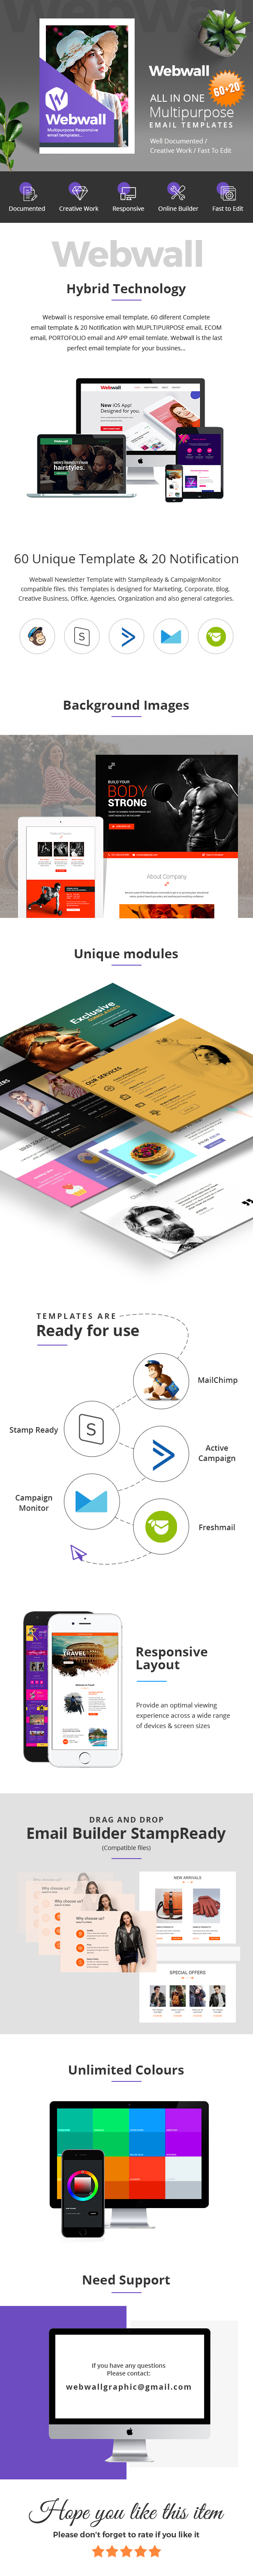 Webwall - Multipurpose Responsive Email Template + StampReady & CampaignMonitor compatible files - 1